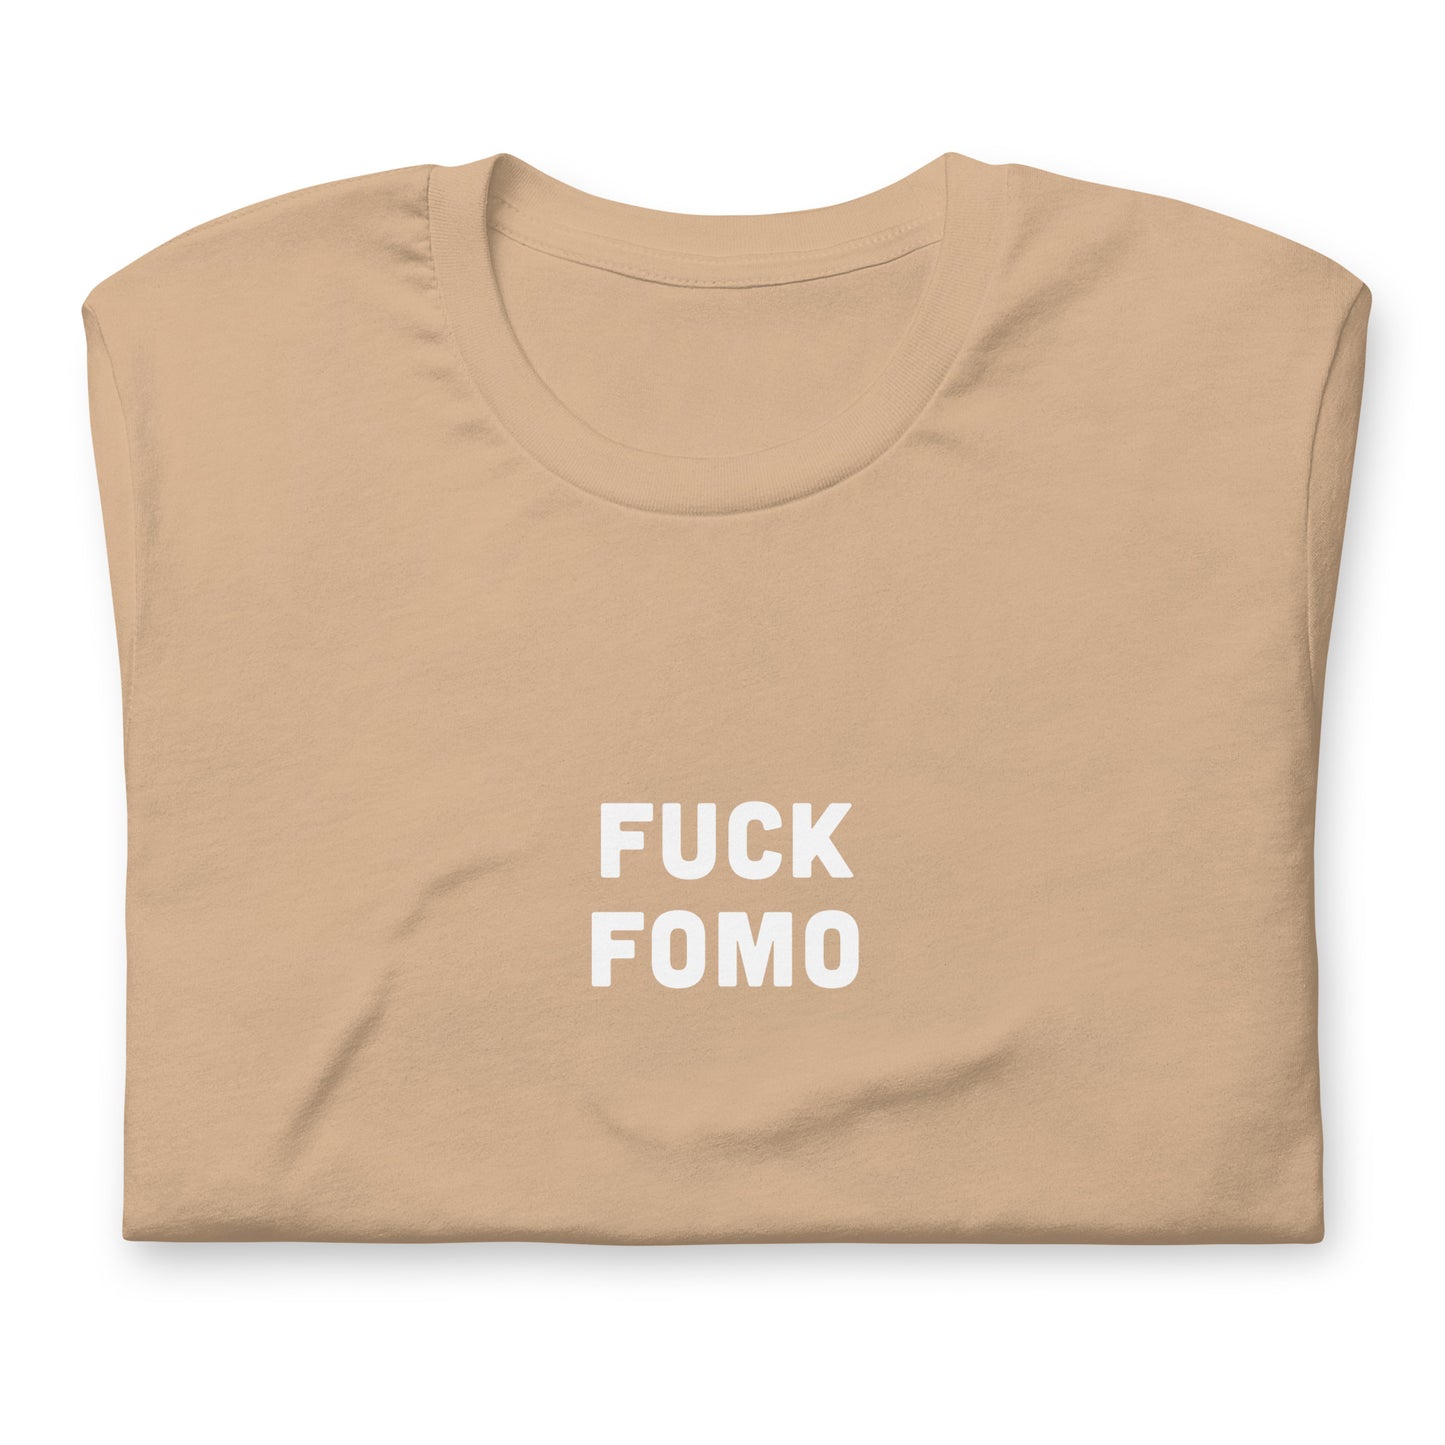 Fuck Fomo T-Shirt Size XL Color Forest